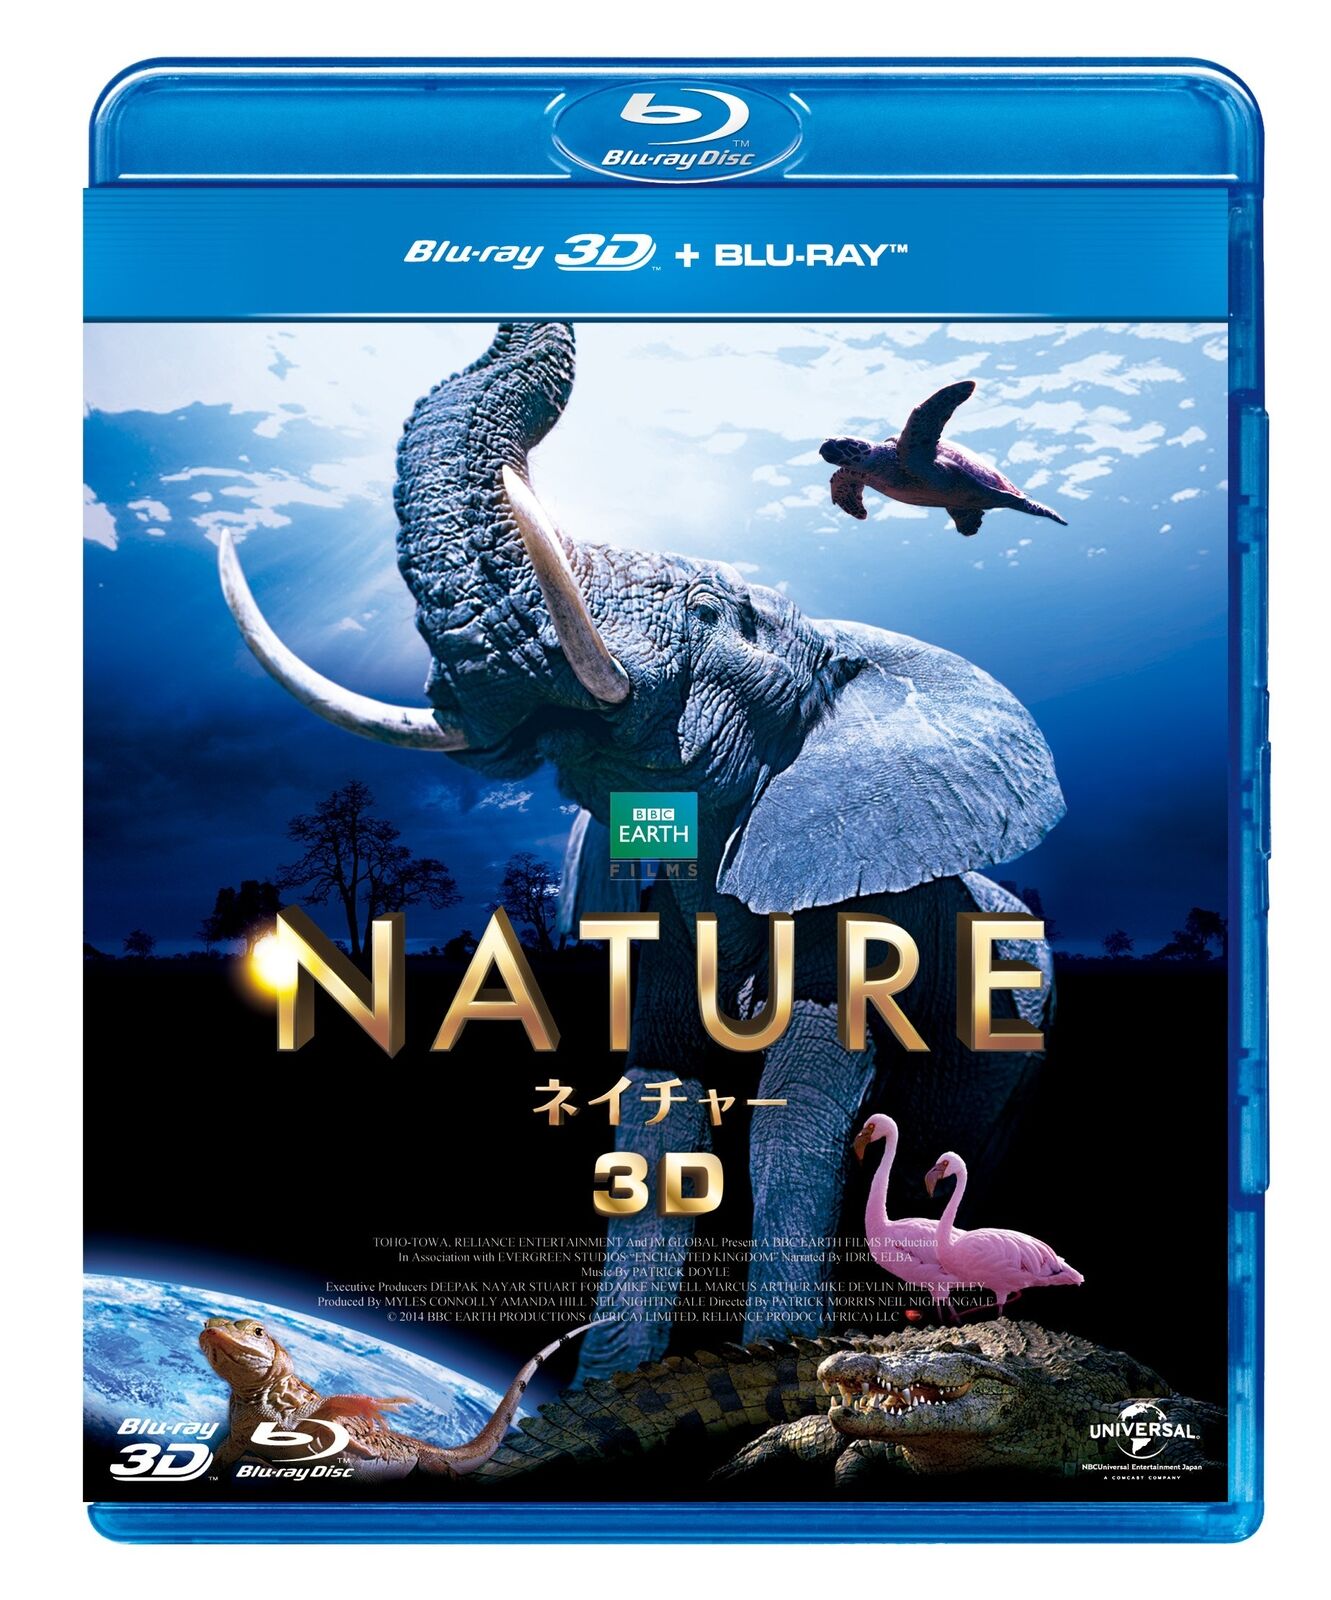 Nature 3d And 2d Blu-ray Set